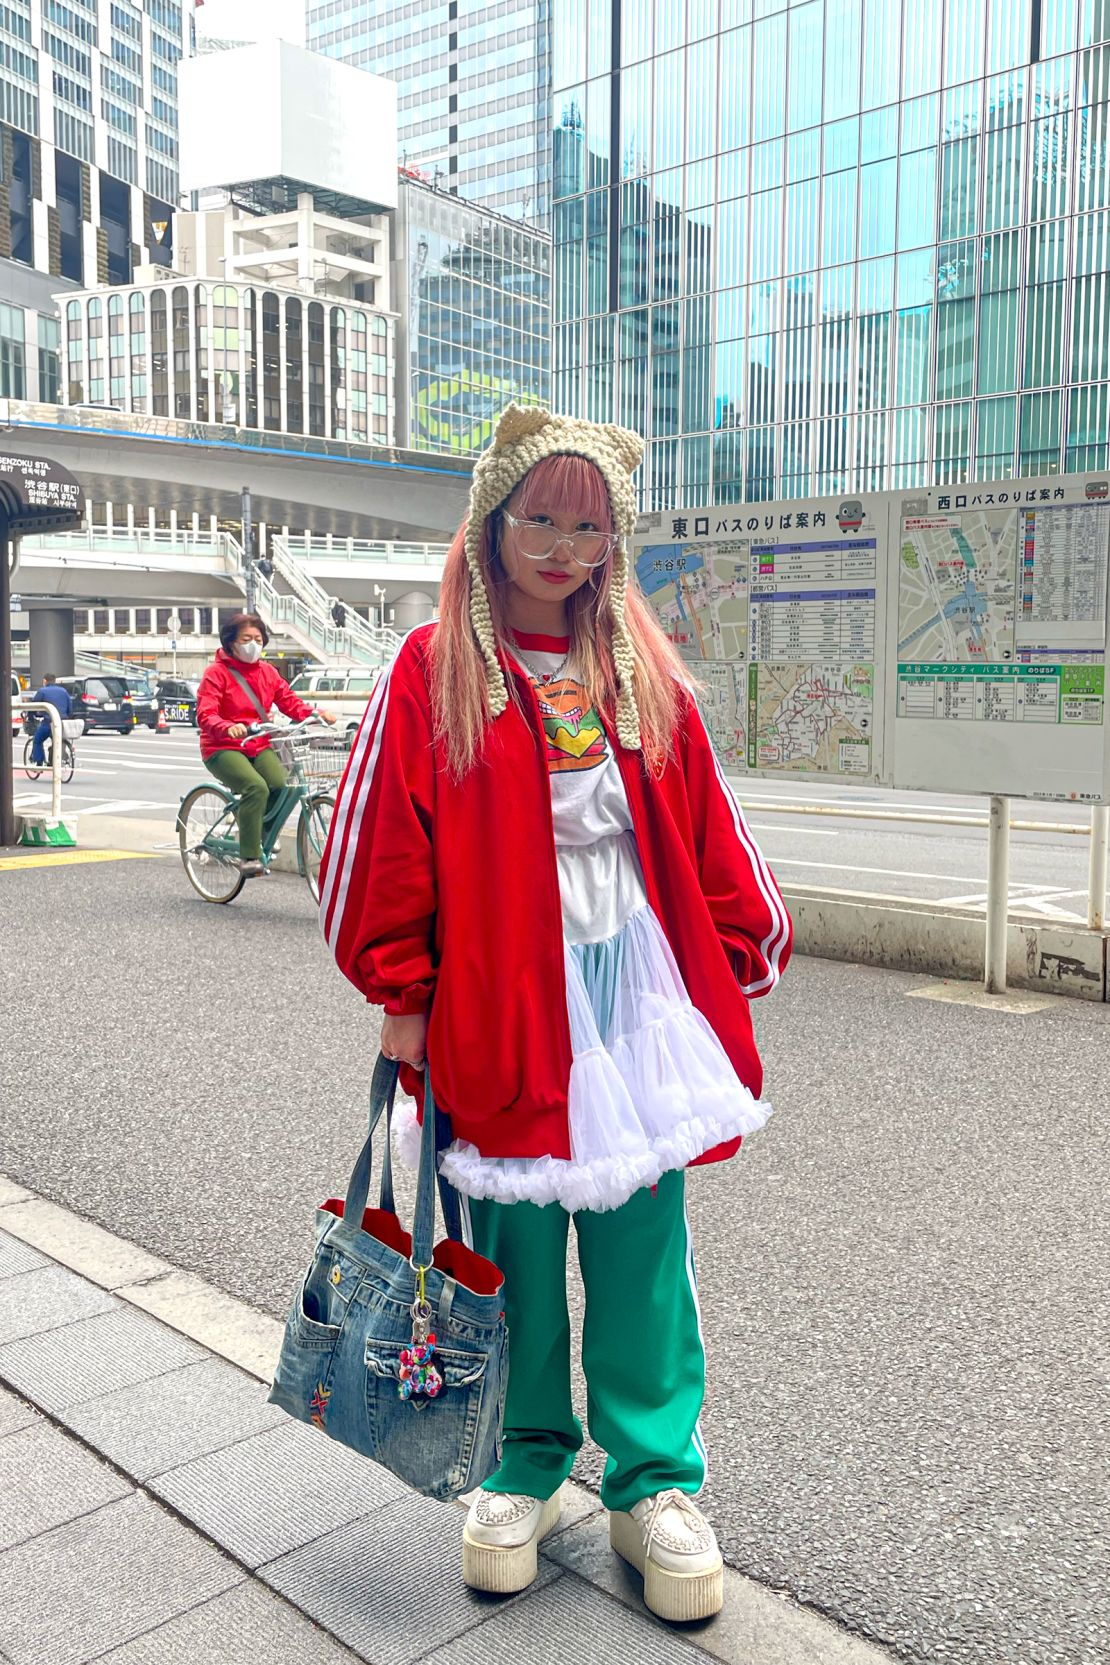 Tokyo Fashion Week Street Style Rejects Every Fashion Rule You've